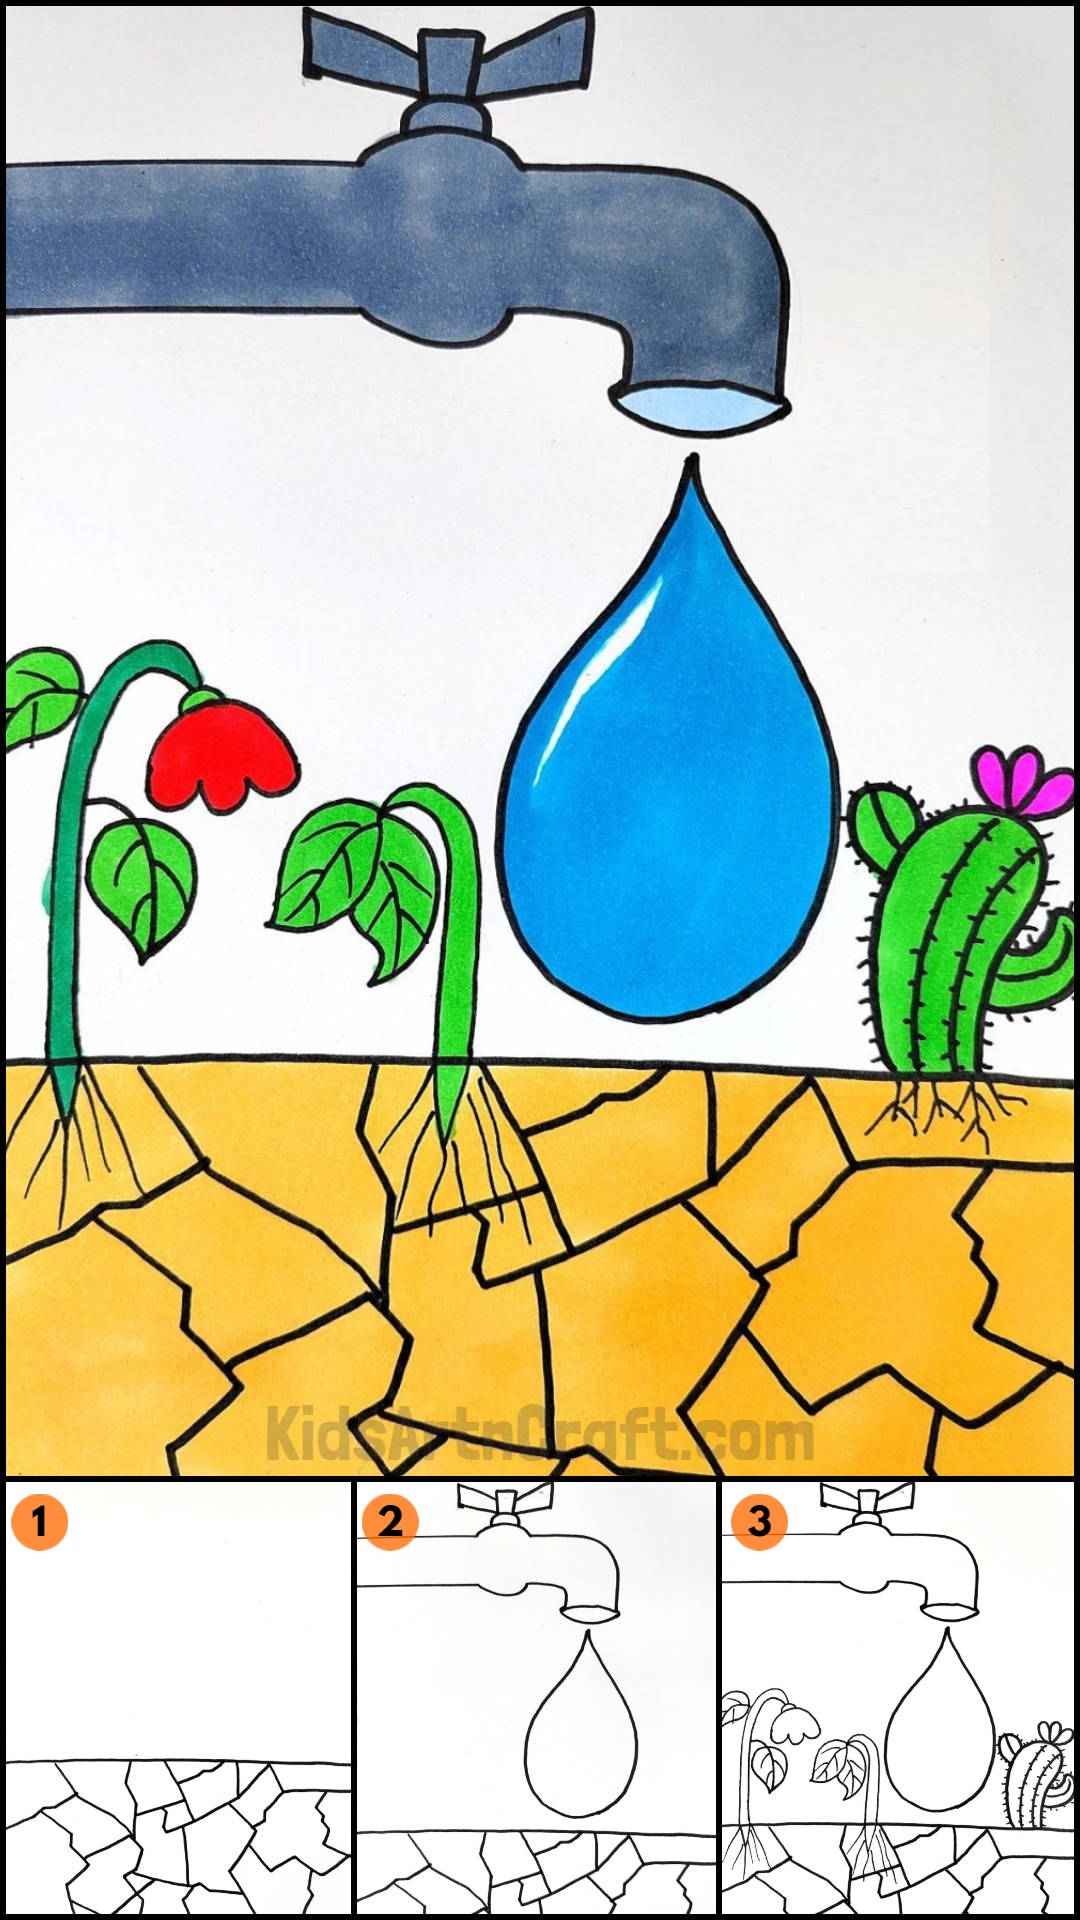 SAVE WATER DRAWING | SAVE WATER POSTER MAKING DRAWING - YouTube-nextbuild.com.vn